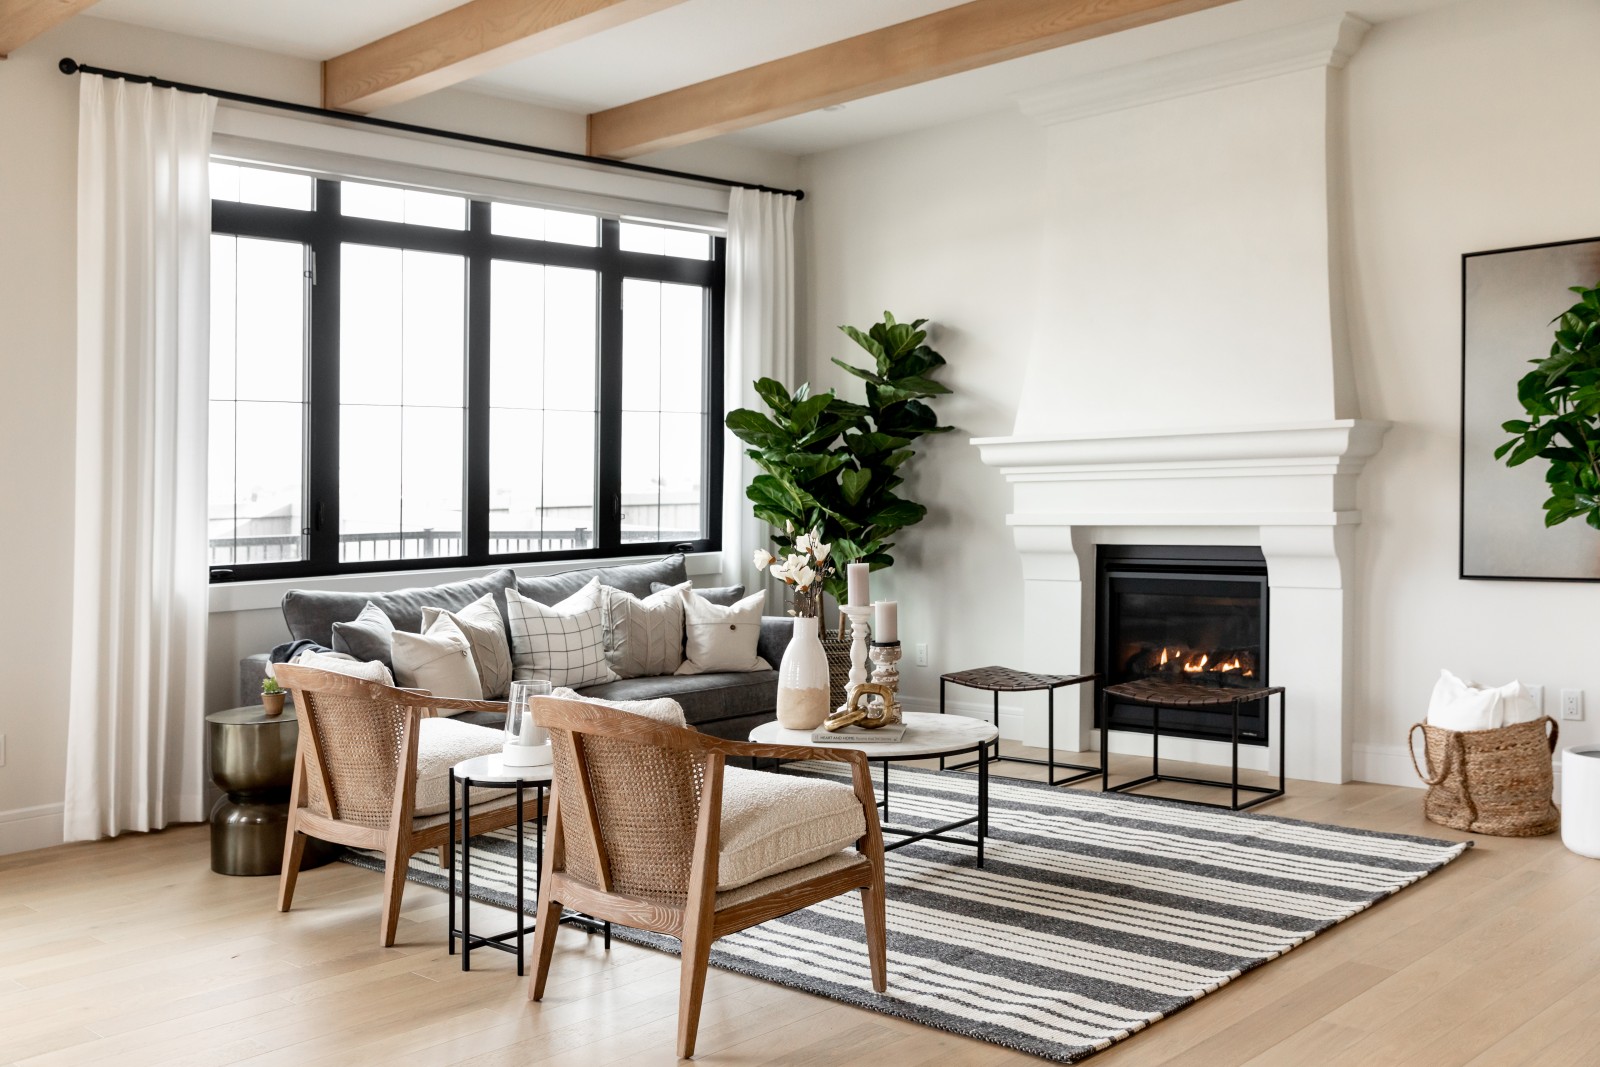 A ten foot tall, custom plaster fireplace, is the focal point of this photo. A cozy couch sits below the black framed windows found at the back of the home and two warm wood chairs sit across from the fireplace